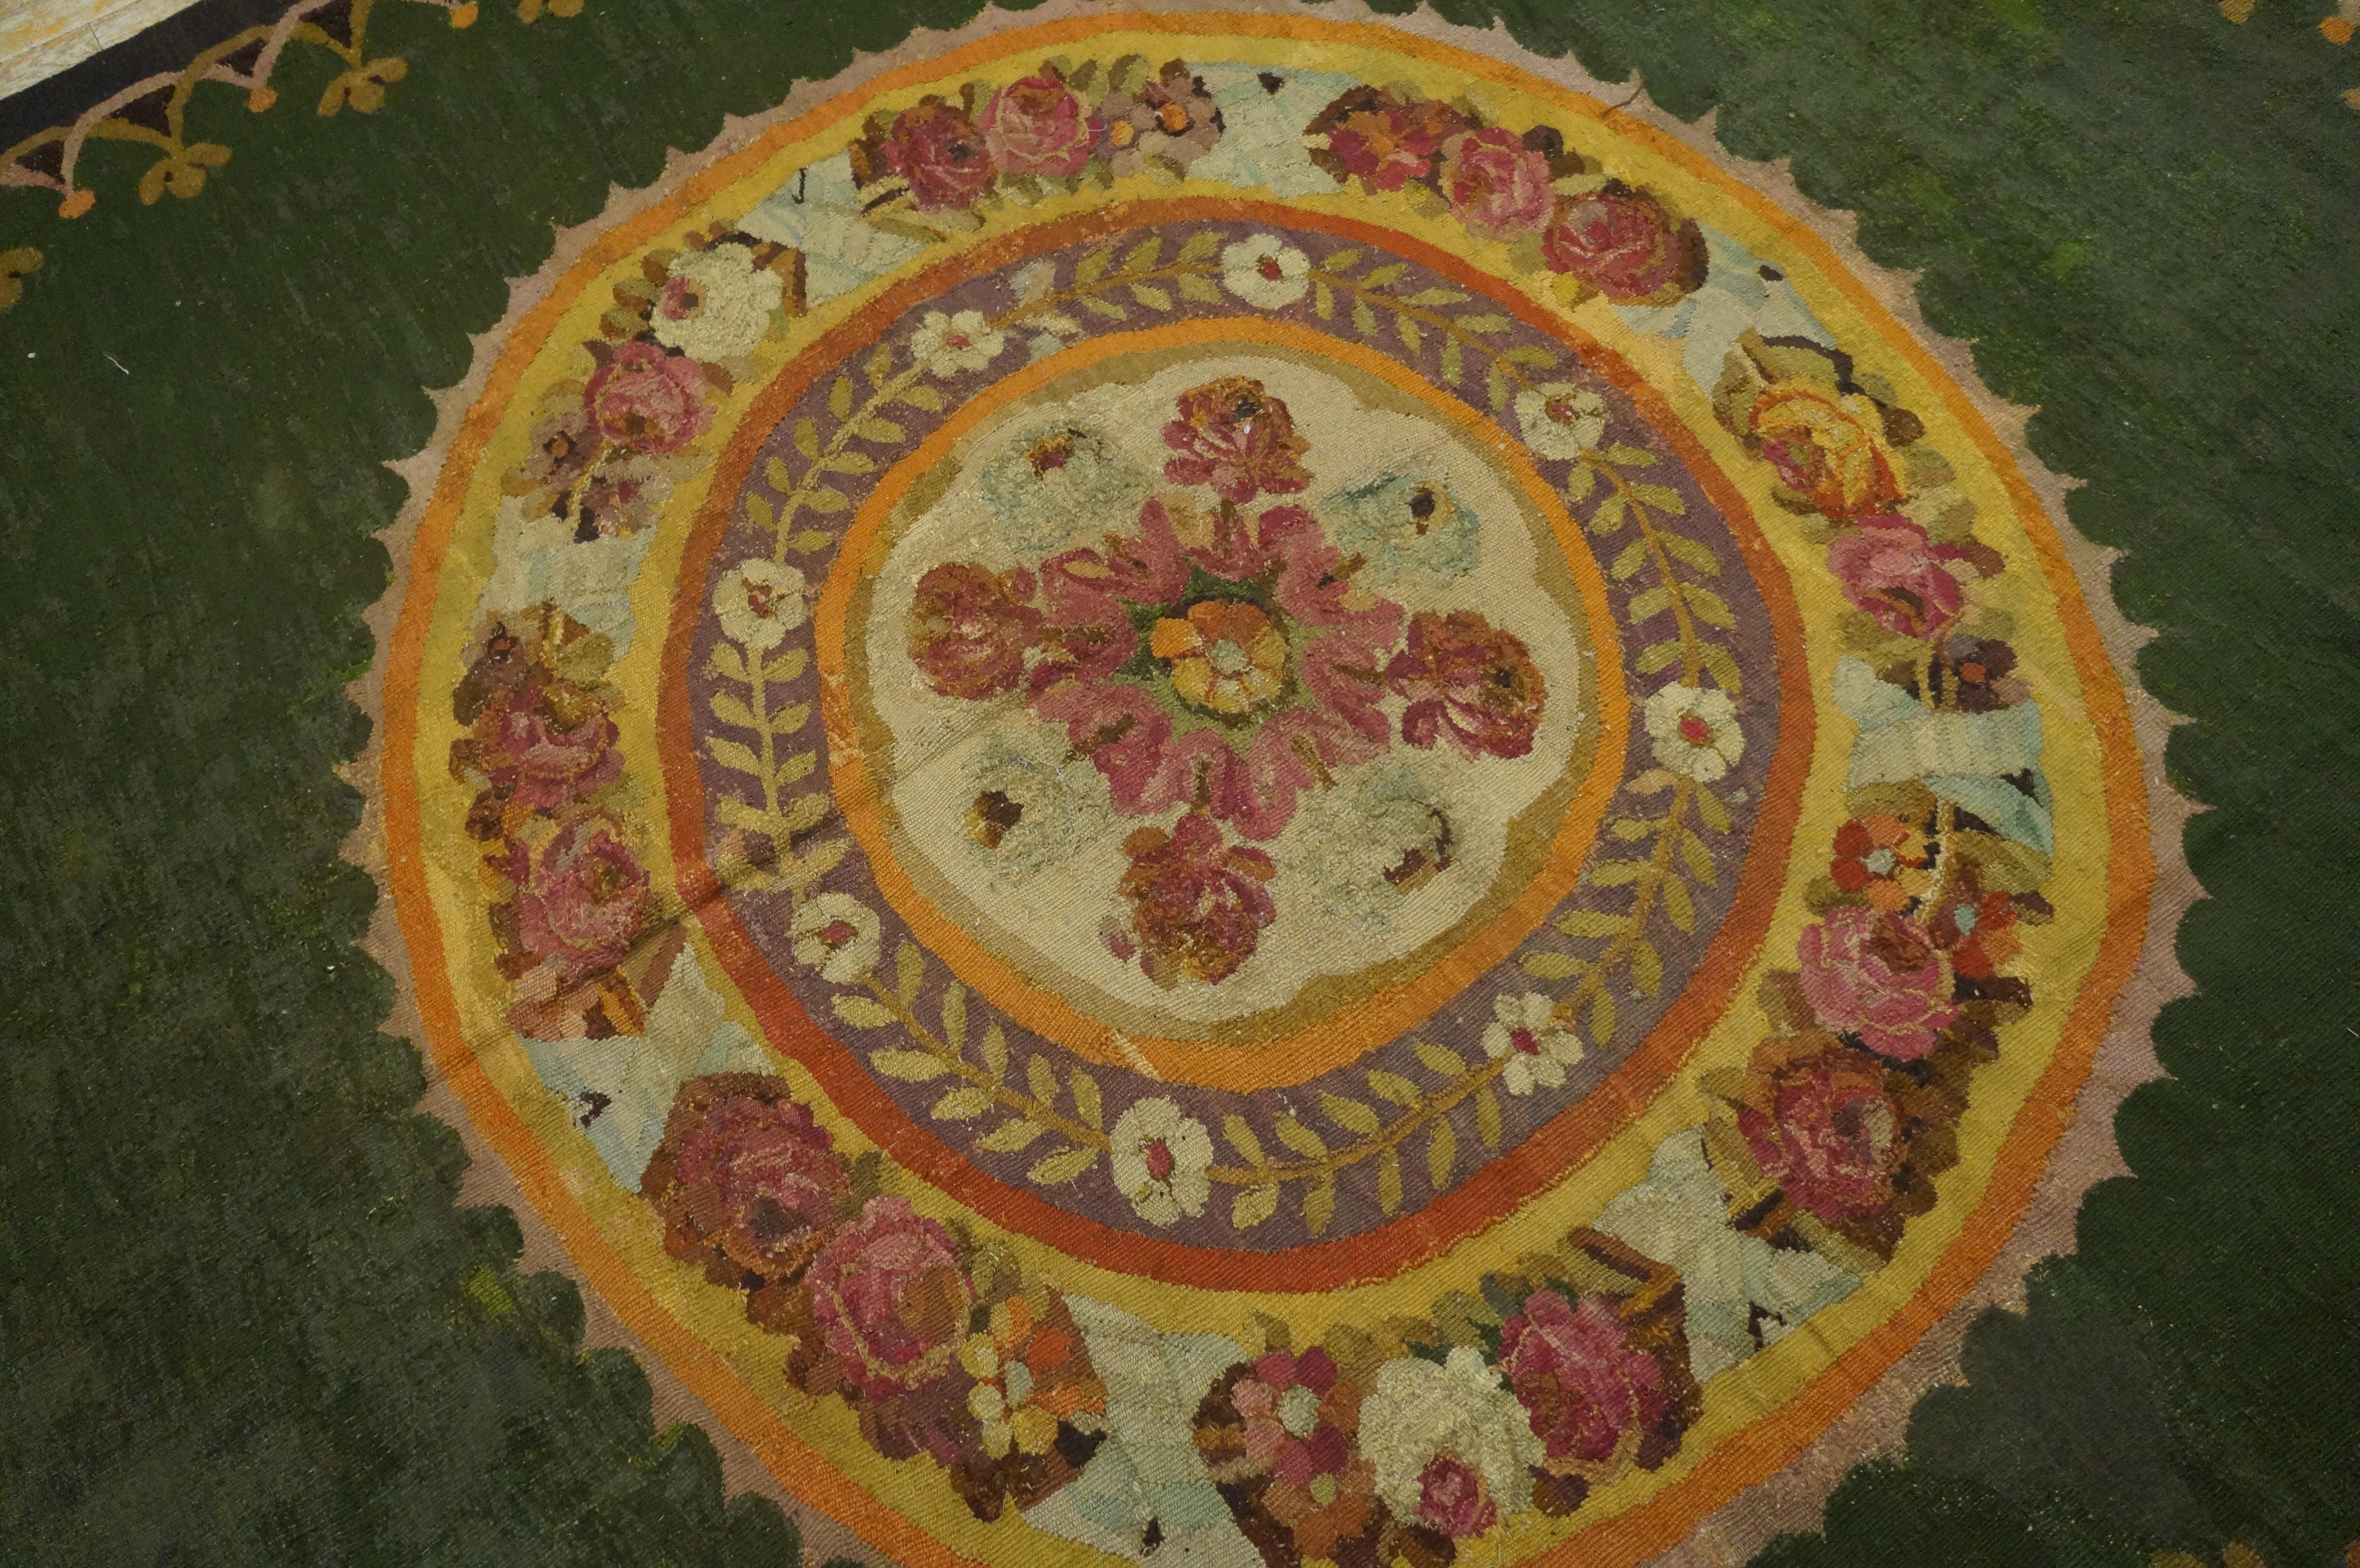 Early 19th Century French Empire Period Aubusson Carpet (7'4